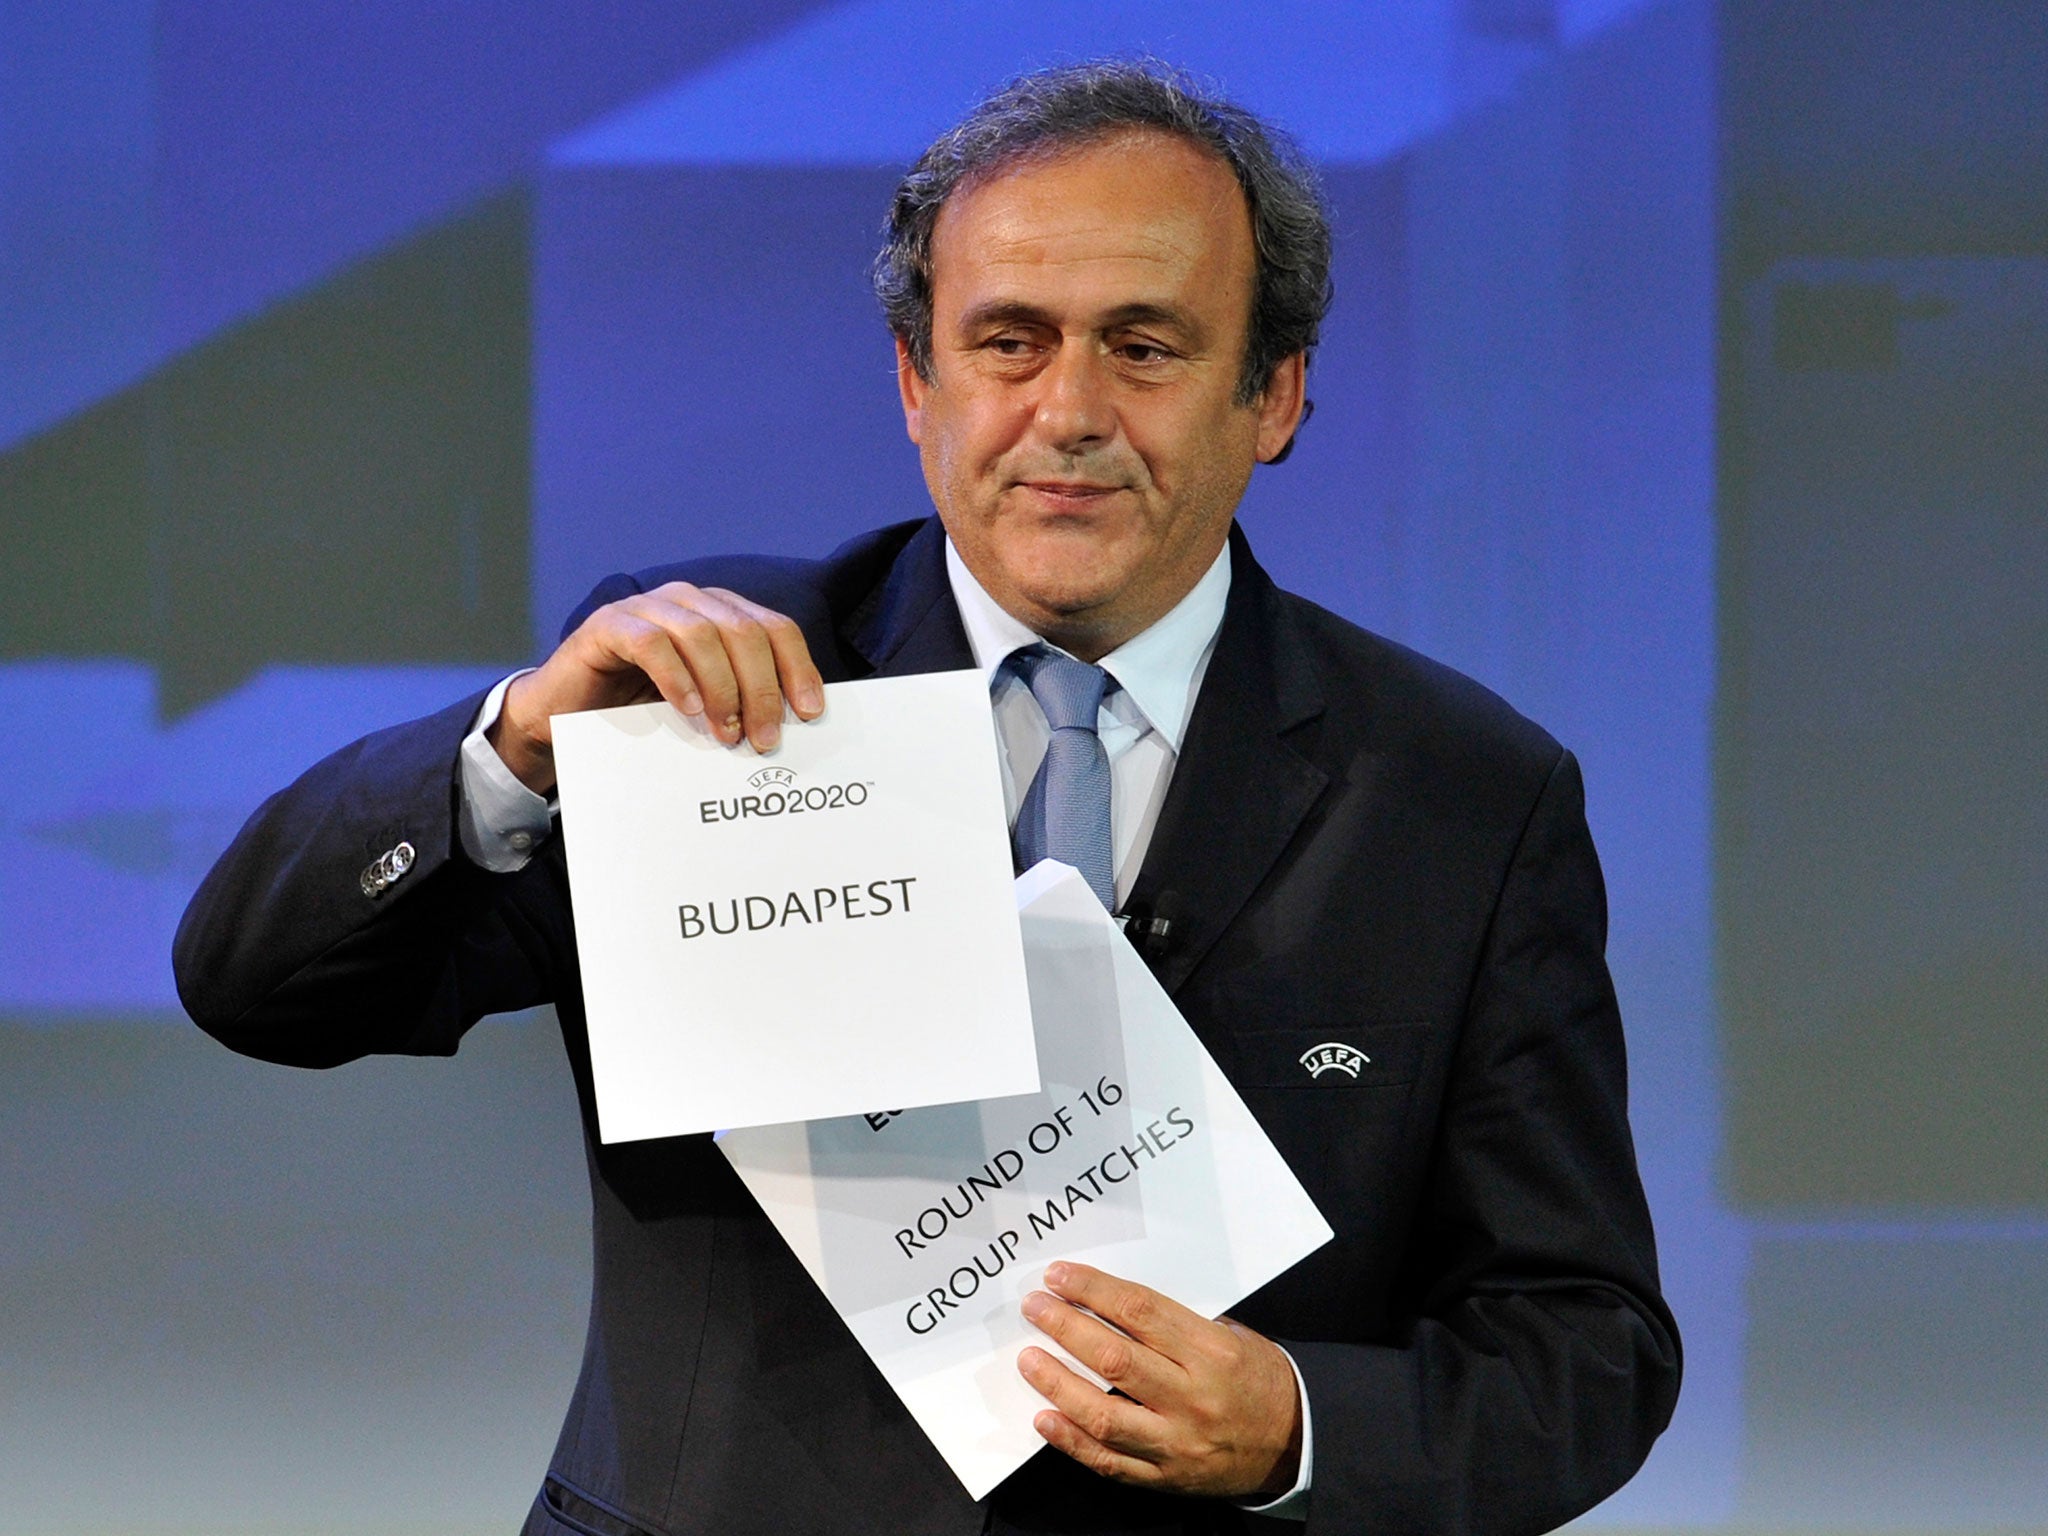 Michel Platini announces Bucharest as one of the 13 host cities for the 2020 European Championship